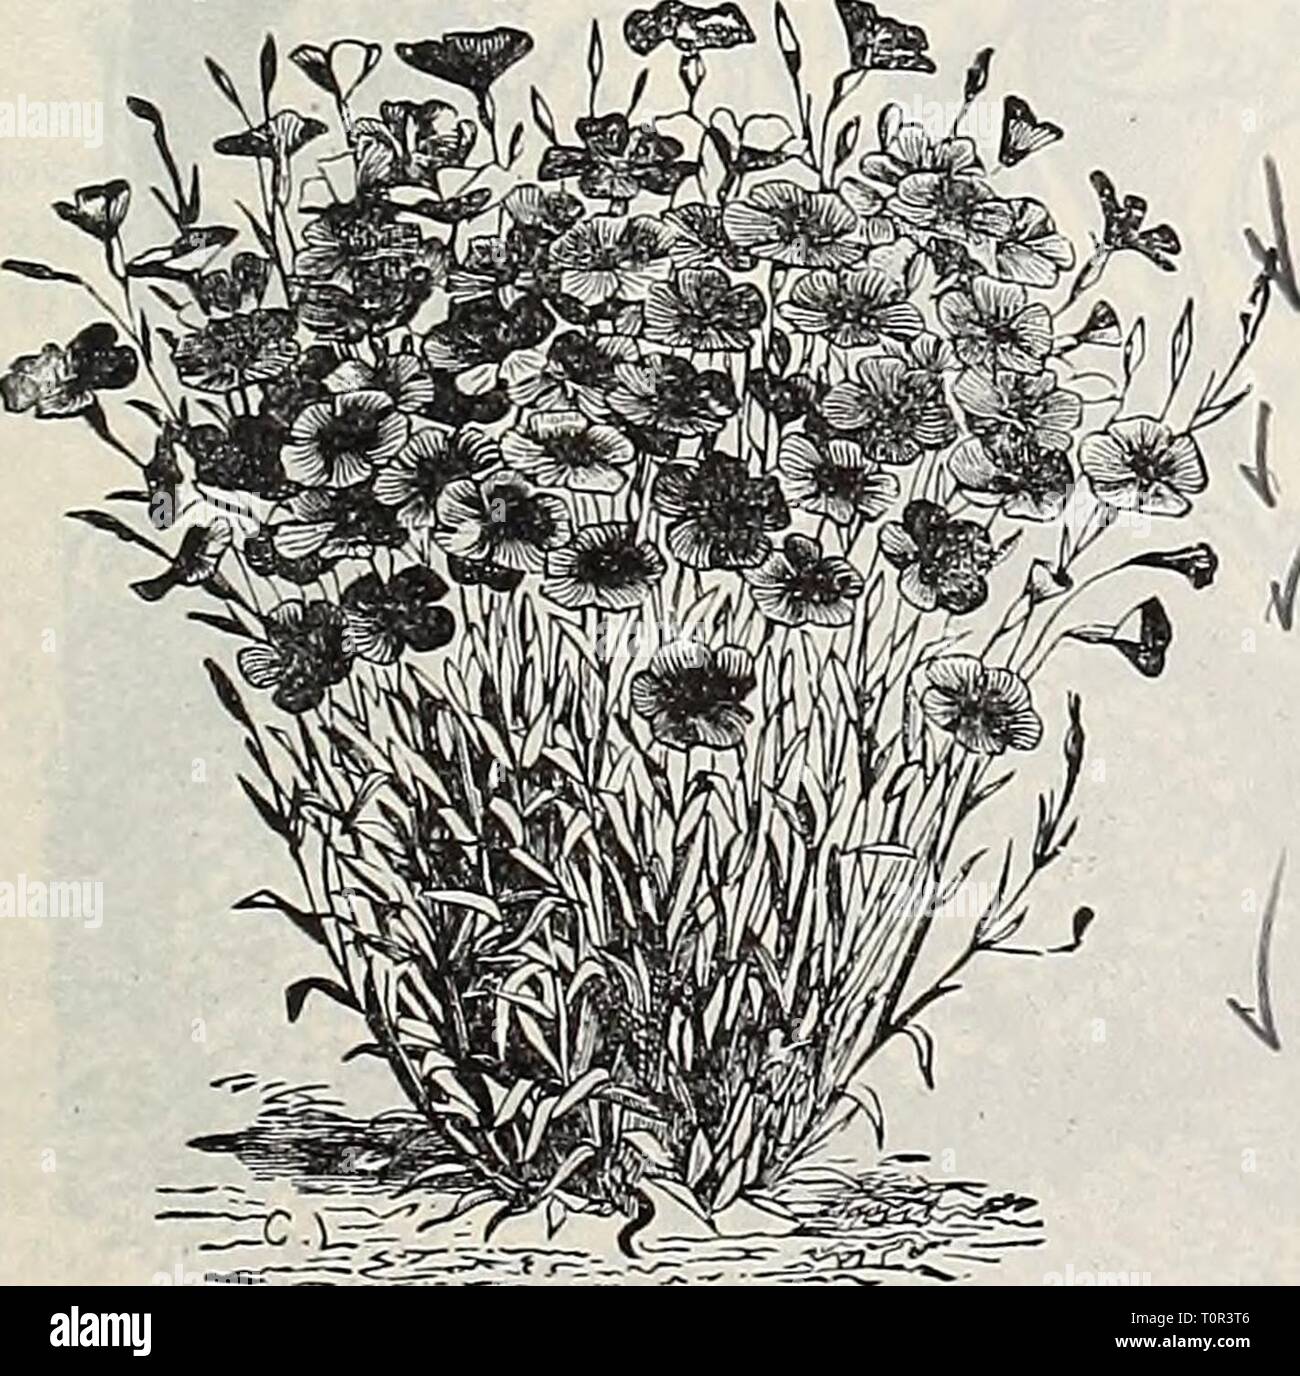 Dreer's garden book  1906 Dreer's garden book : 1906  dreersgardenbook1906henr Year: 1906  Alyssum Little Gem or Carpet of Snow.    ALYSSUM (Mad-Wort). Pretty little plants for beds, vases, baskets, edgings or rock-work, blooming profusely all summer; use- ful also for winter-flowering. Very sweetly scented. per pkt. 1101 Little Gem, or Carpet of Snow. Of dwarf, compact habit, 4 to 6 inches in height, each plant covering a circle 15 to 30 inches in diameter. It begins to bloom when quite small, and the plants are a solid mass of white from spring to late in au- tumn. (See cut.) 50c.peroz. 5 11 Stock Photo